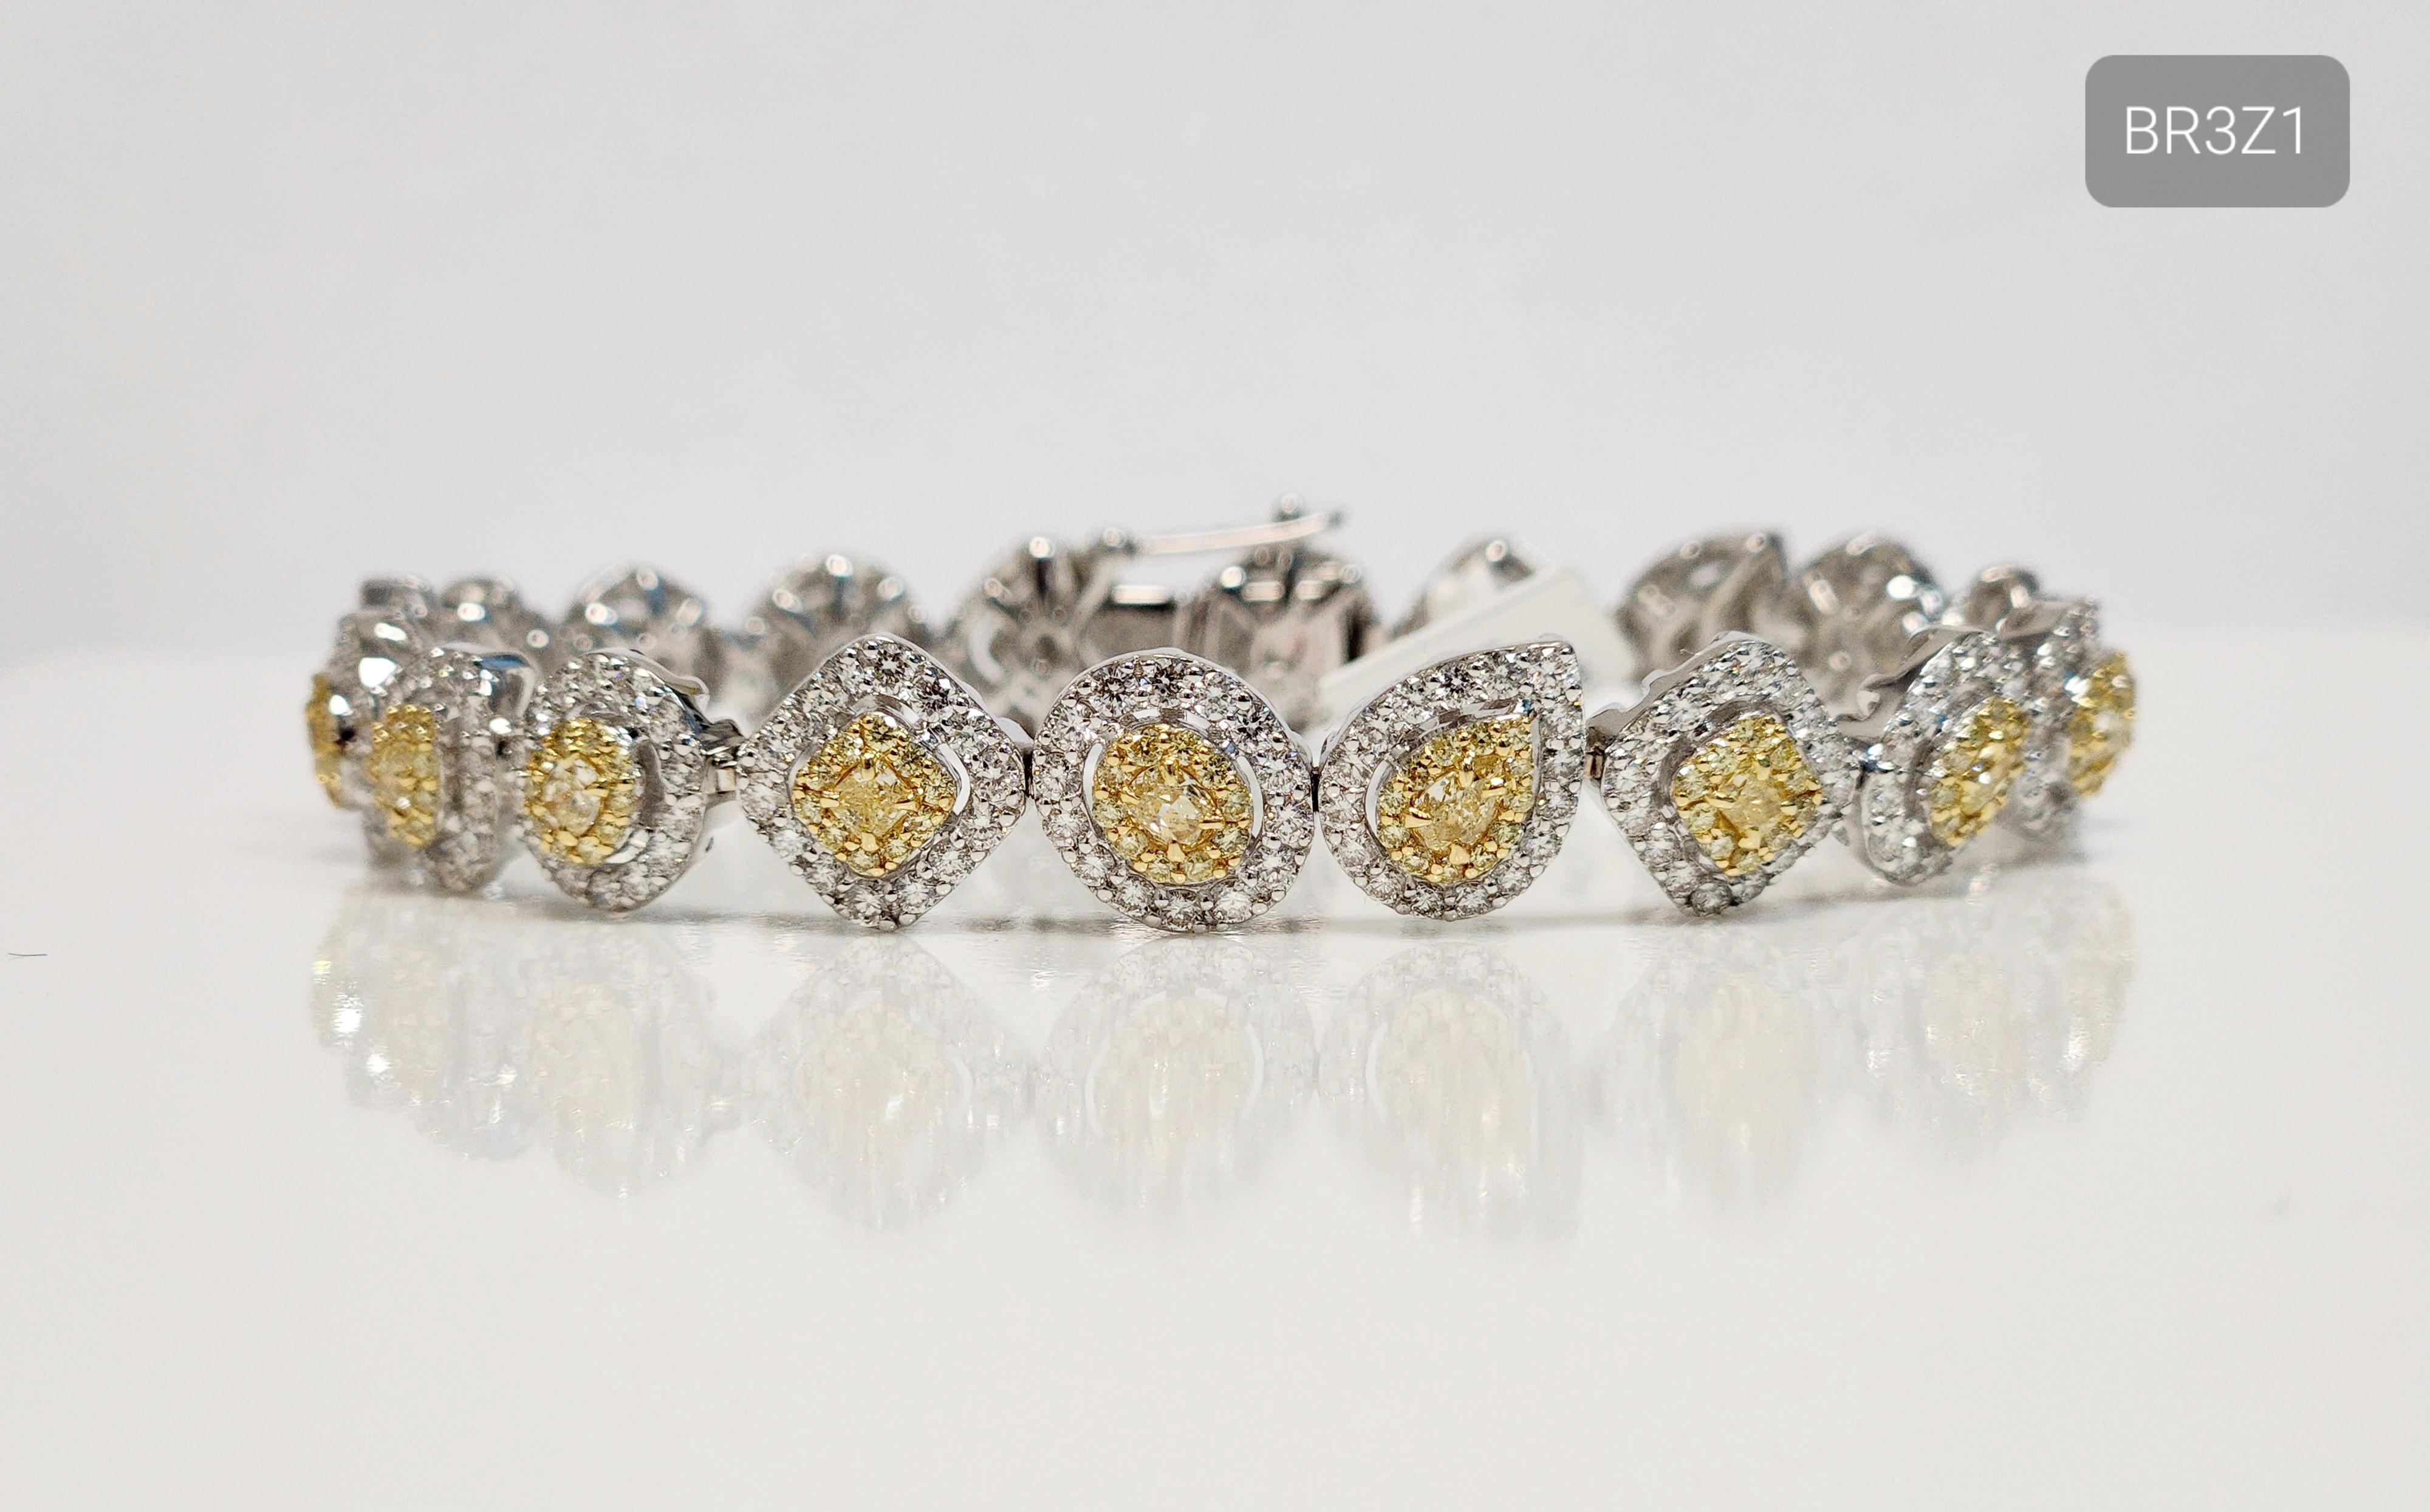 Immerse yourself in the captivating radiance of this Mix Shape Yellow Diamond Line Bracelet. Crafted with utmost precision and artistry, this bracelet features a collection of dazzling 1.74 carats yellow diamonds in various shapes, including pear,